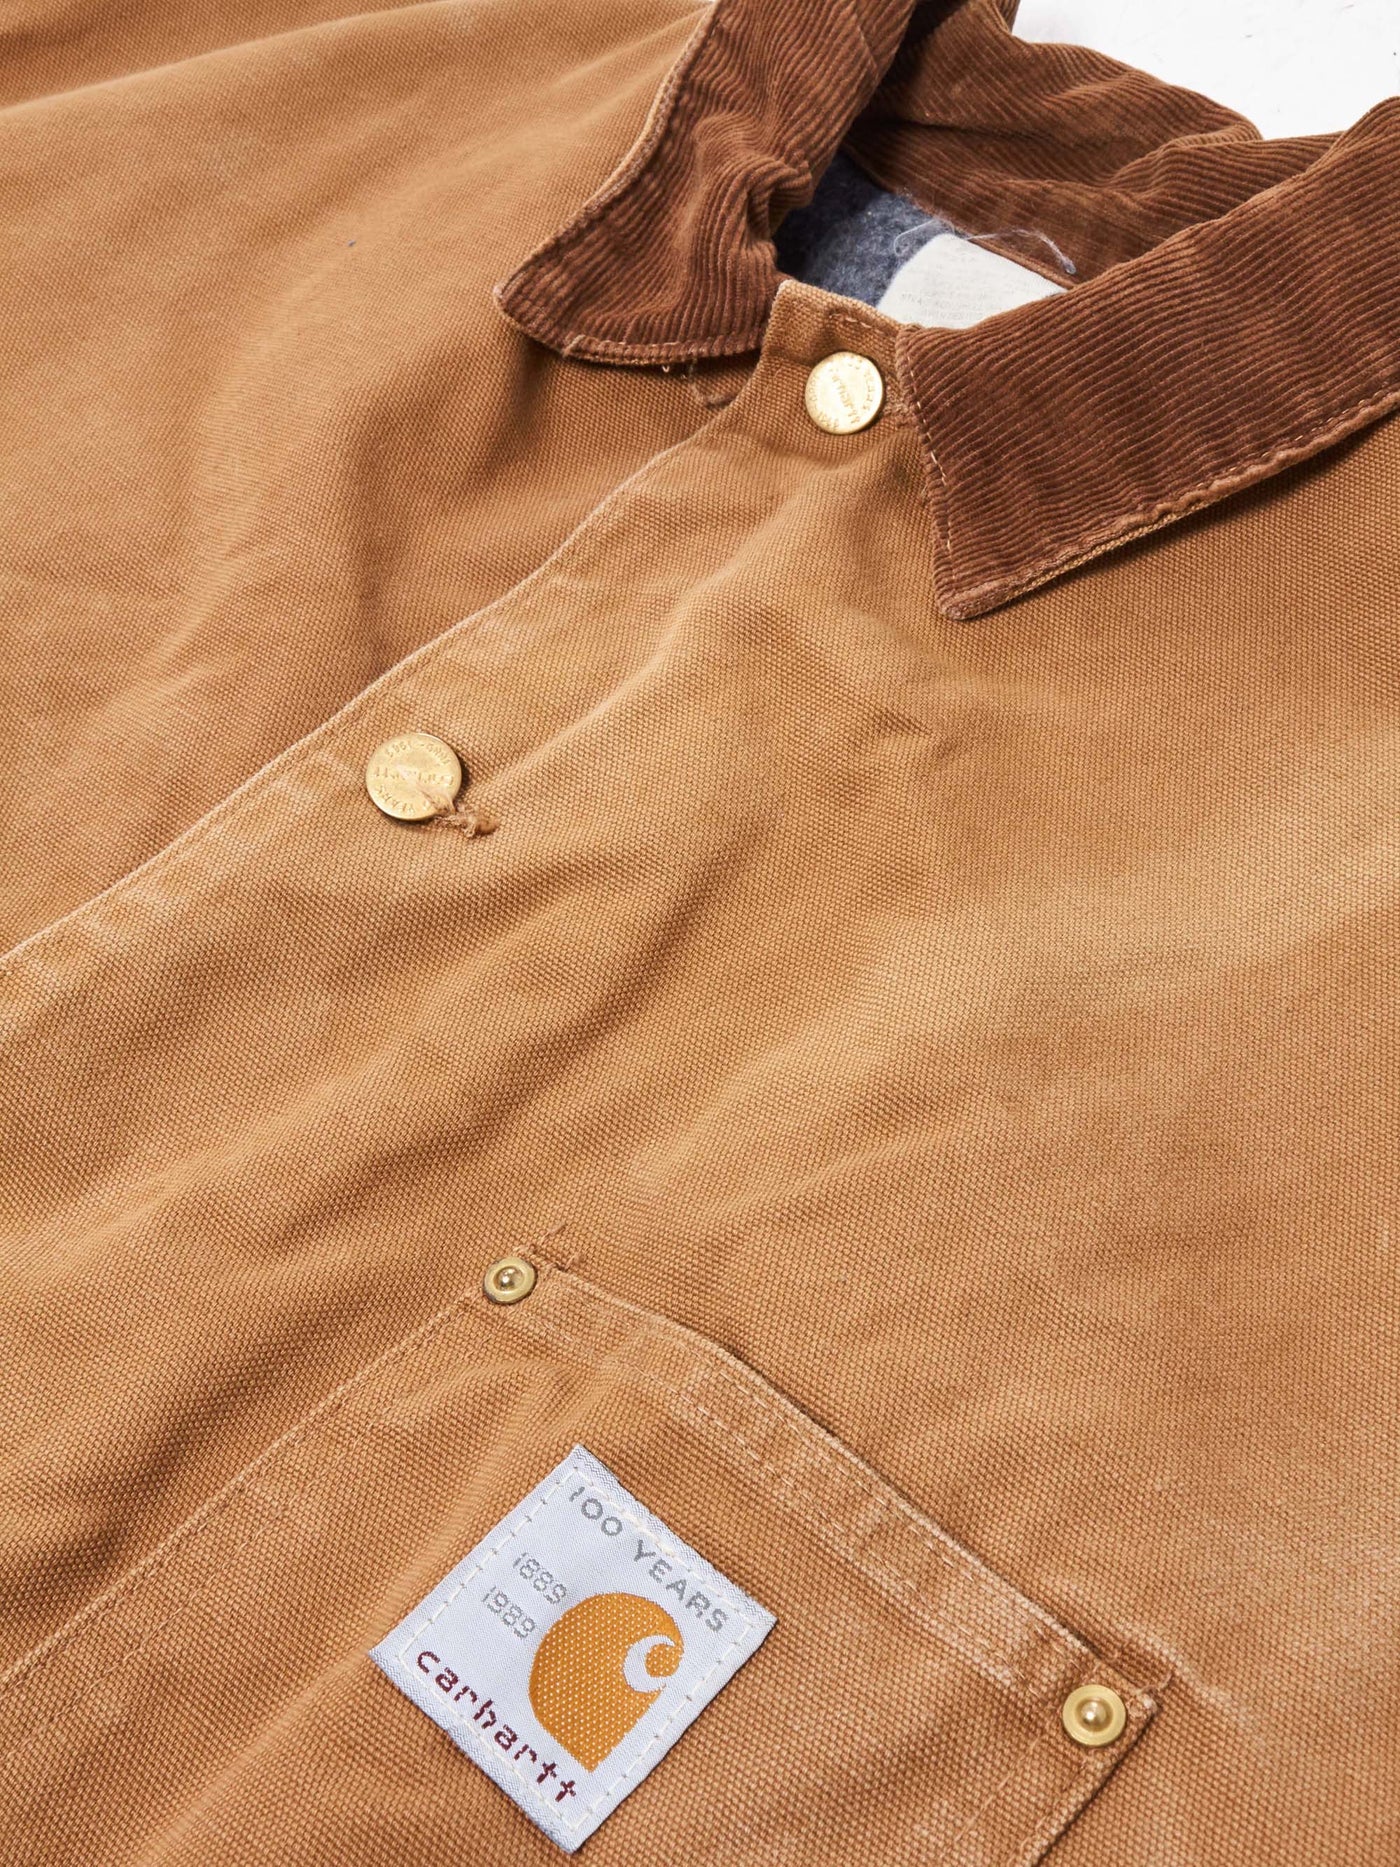 Carhartt History: From Workwear to Streetwear to Vintage